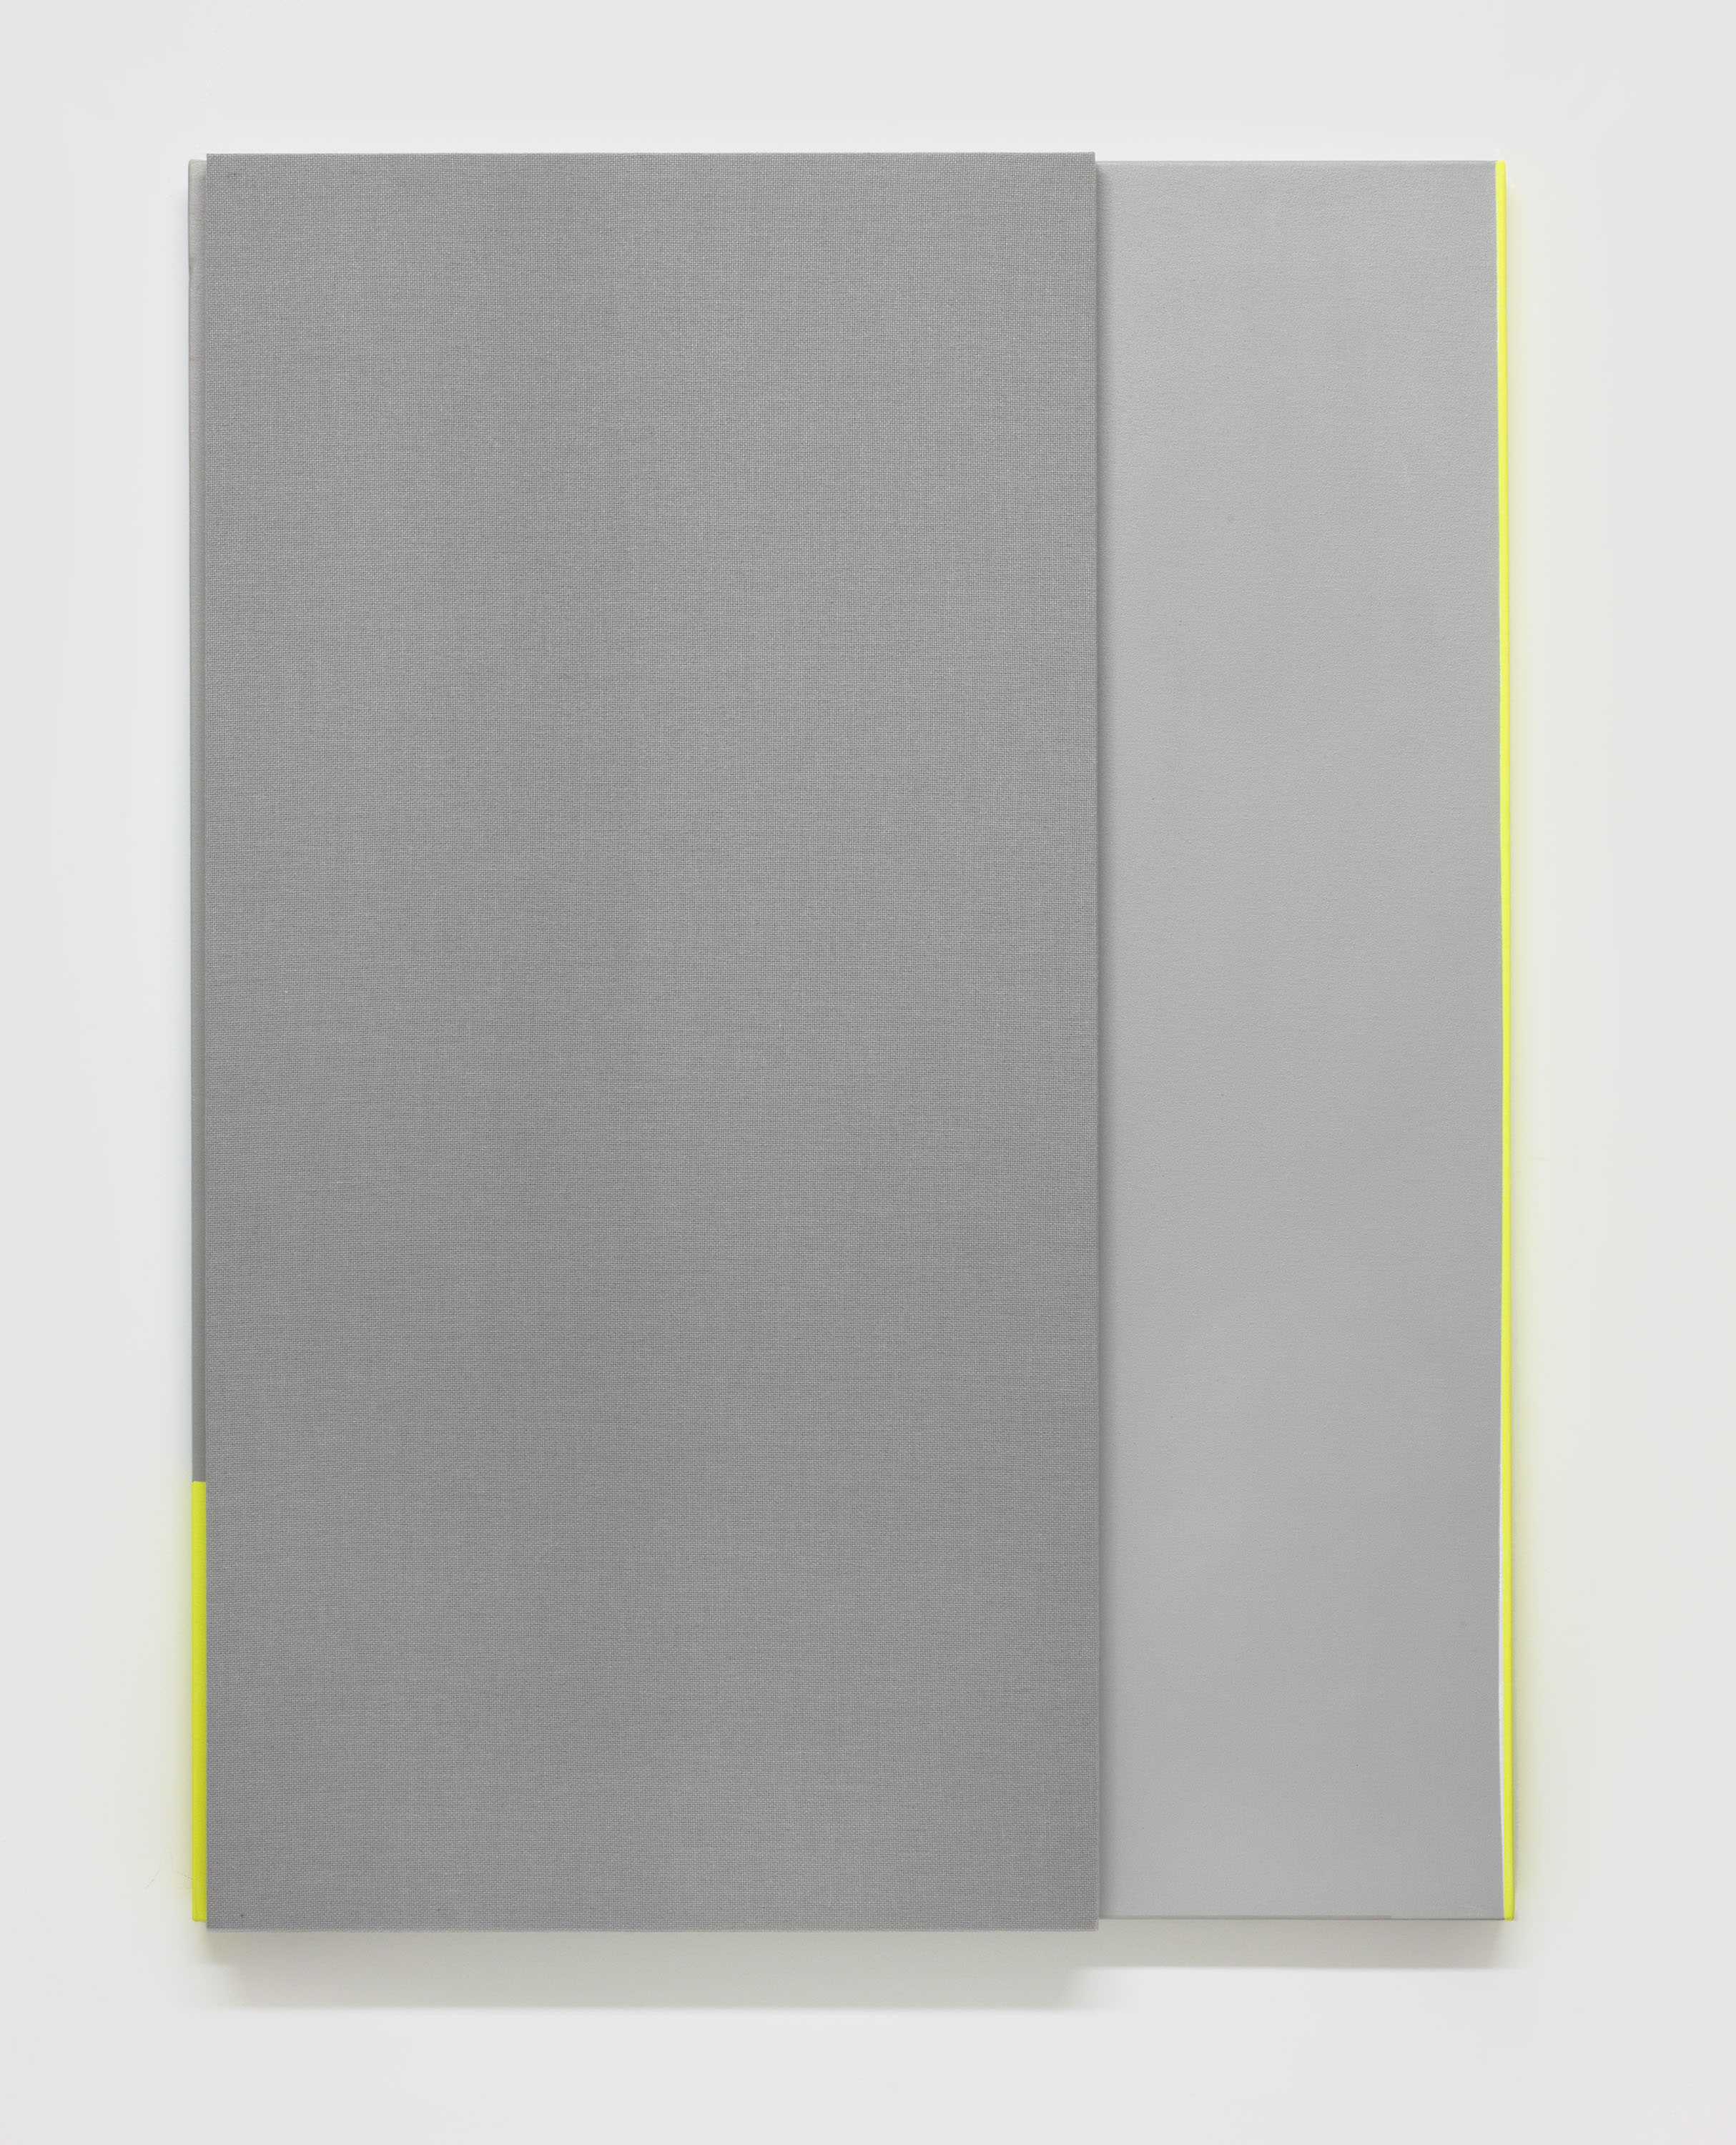  Soft Gray Tone with Reverberation #2 --&nbsp;Acoustic absorber panel and acrylic paint on canvas, 36 x 48 inches each, 2013. 